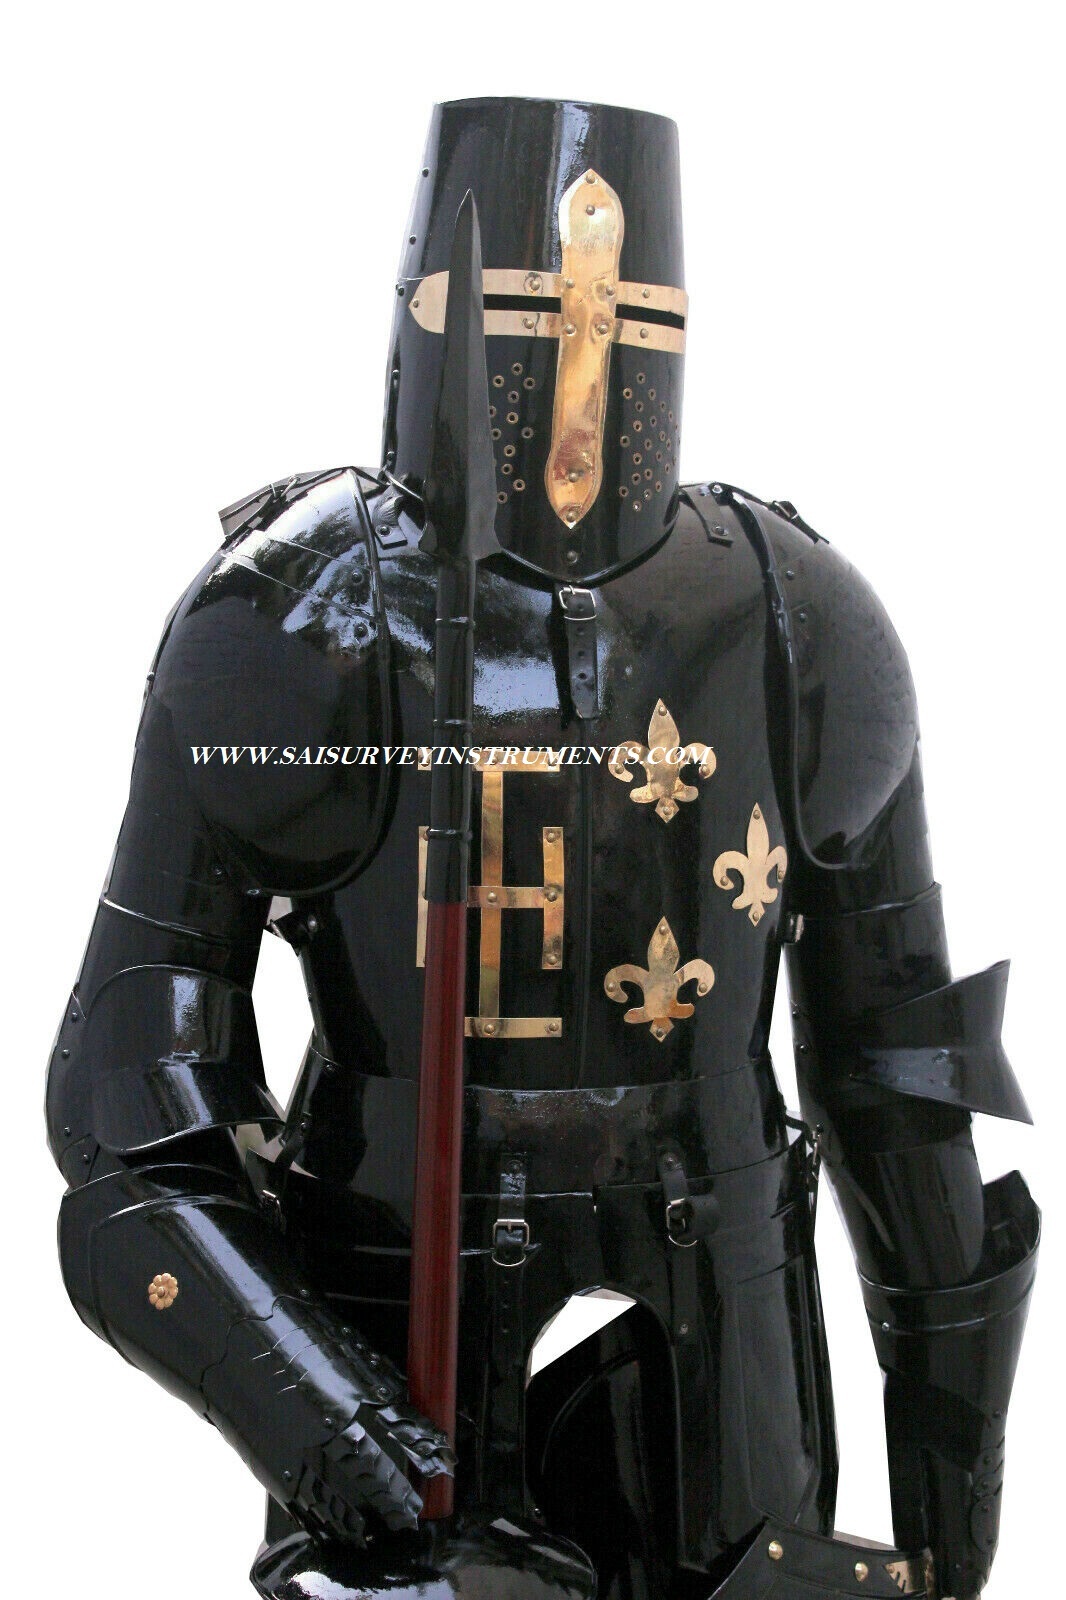 Armor X-Mas Armour Medieval Wearable Knight Crusader Full Suit Of Armor Collectible